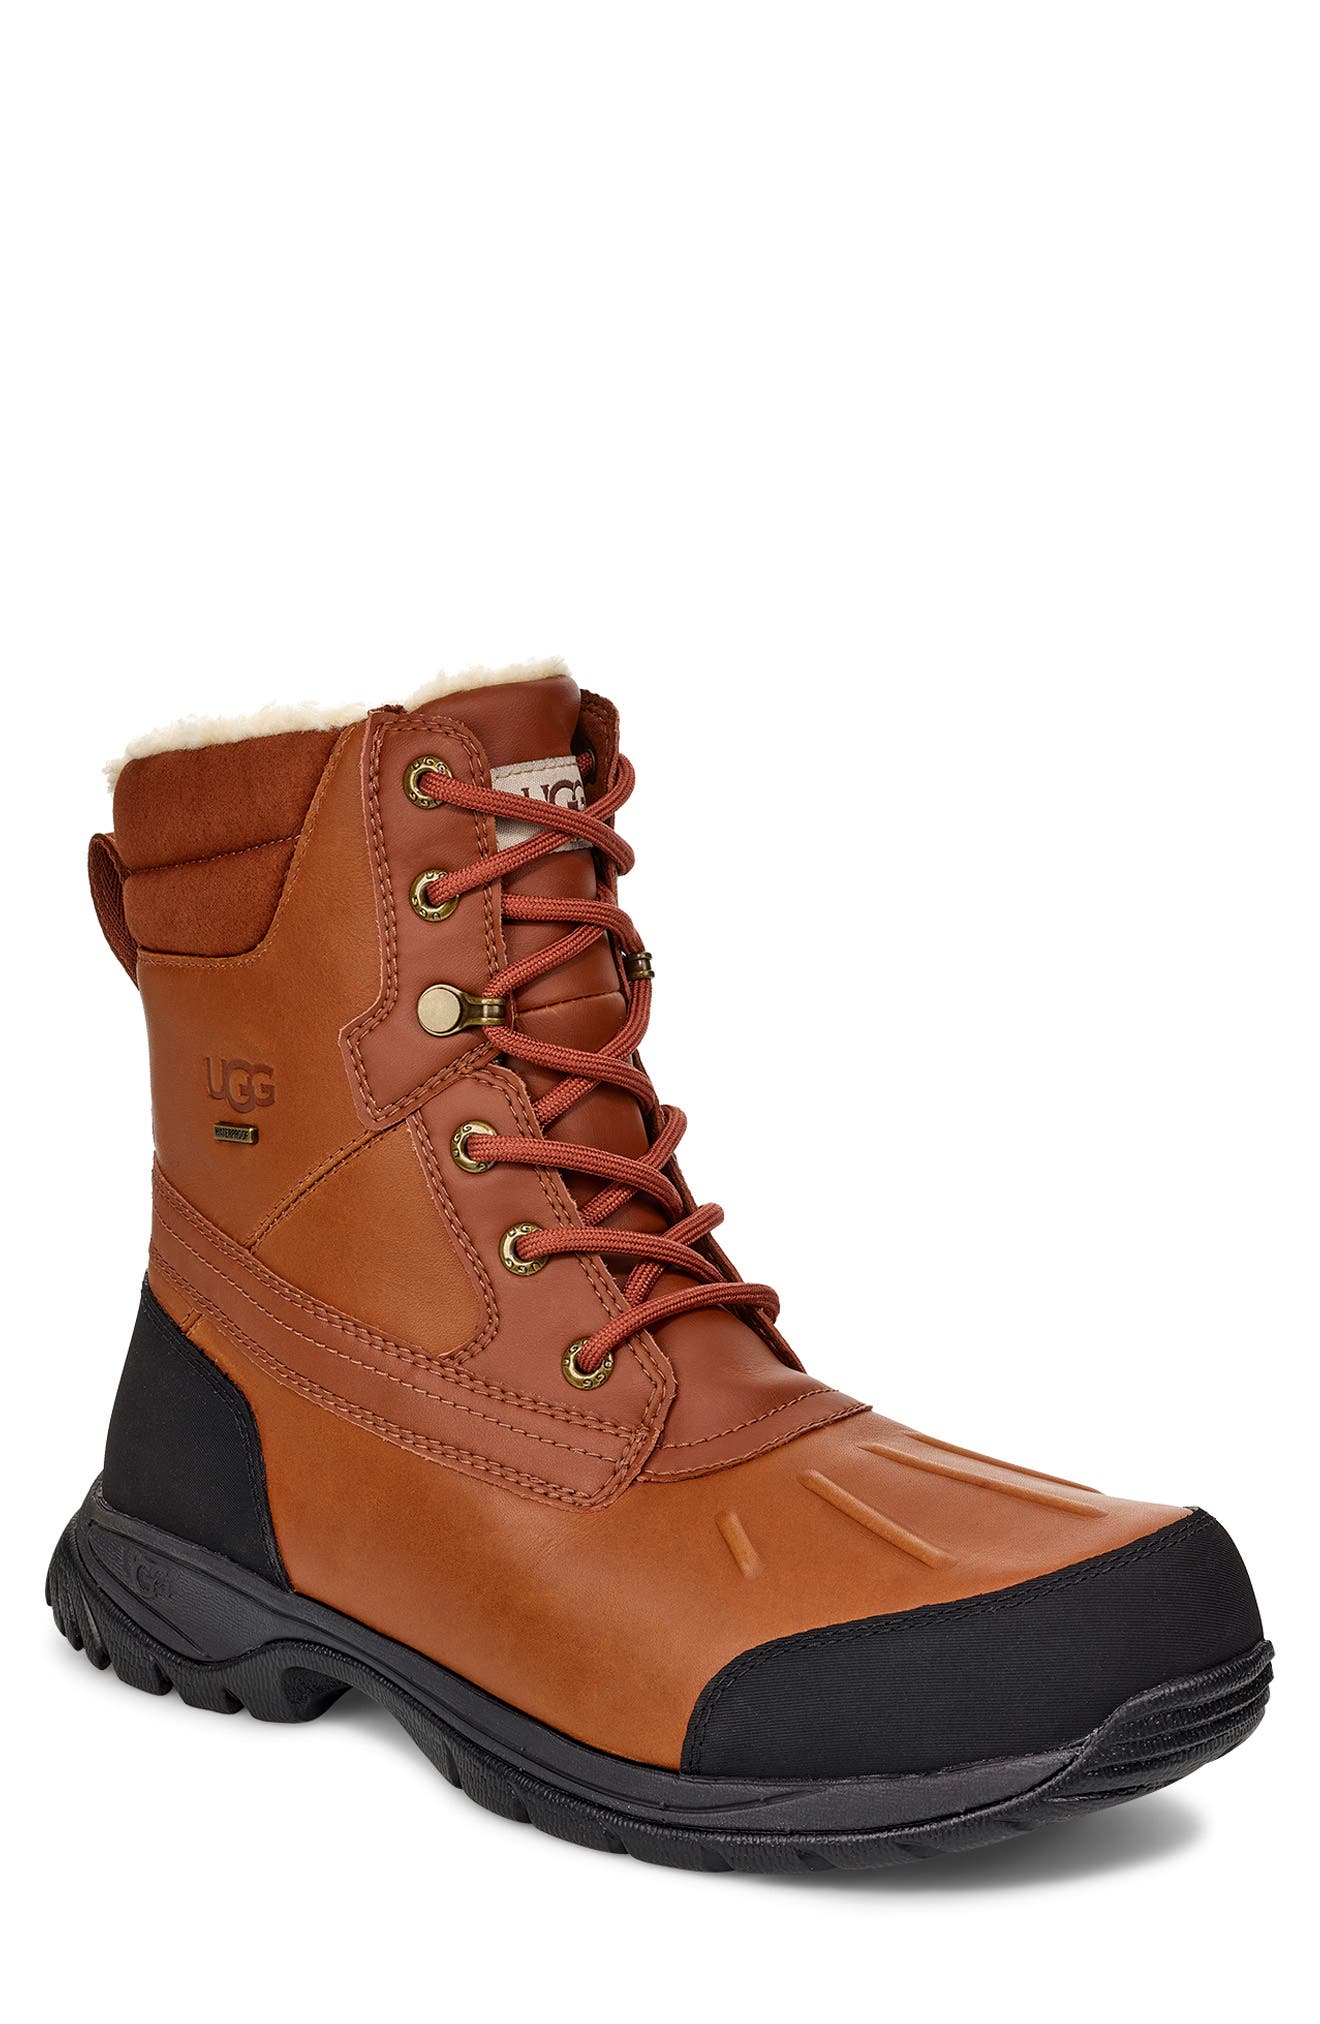 men's all weather ugg boots